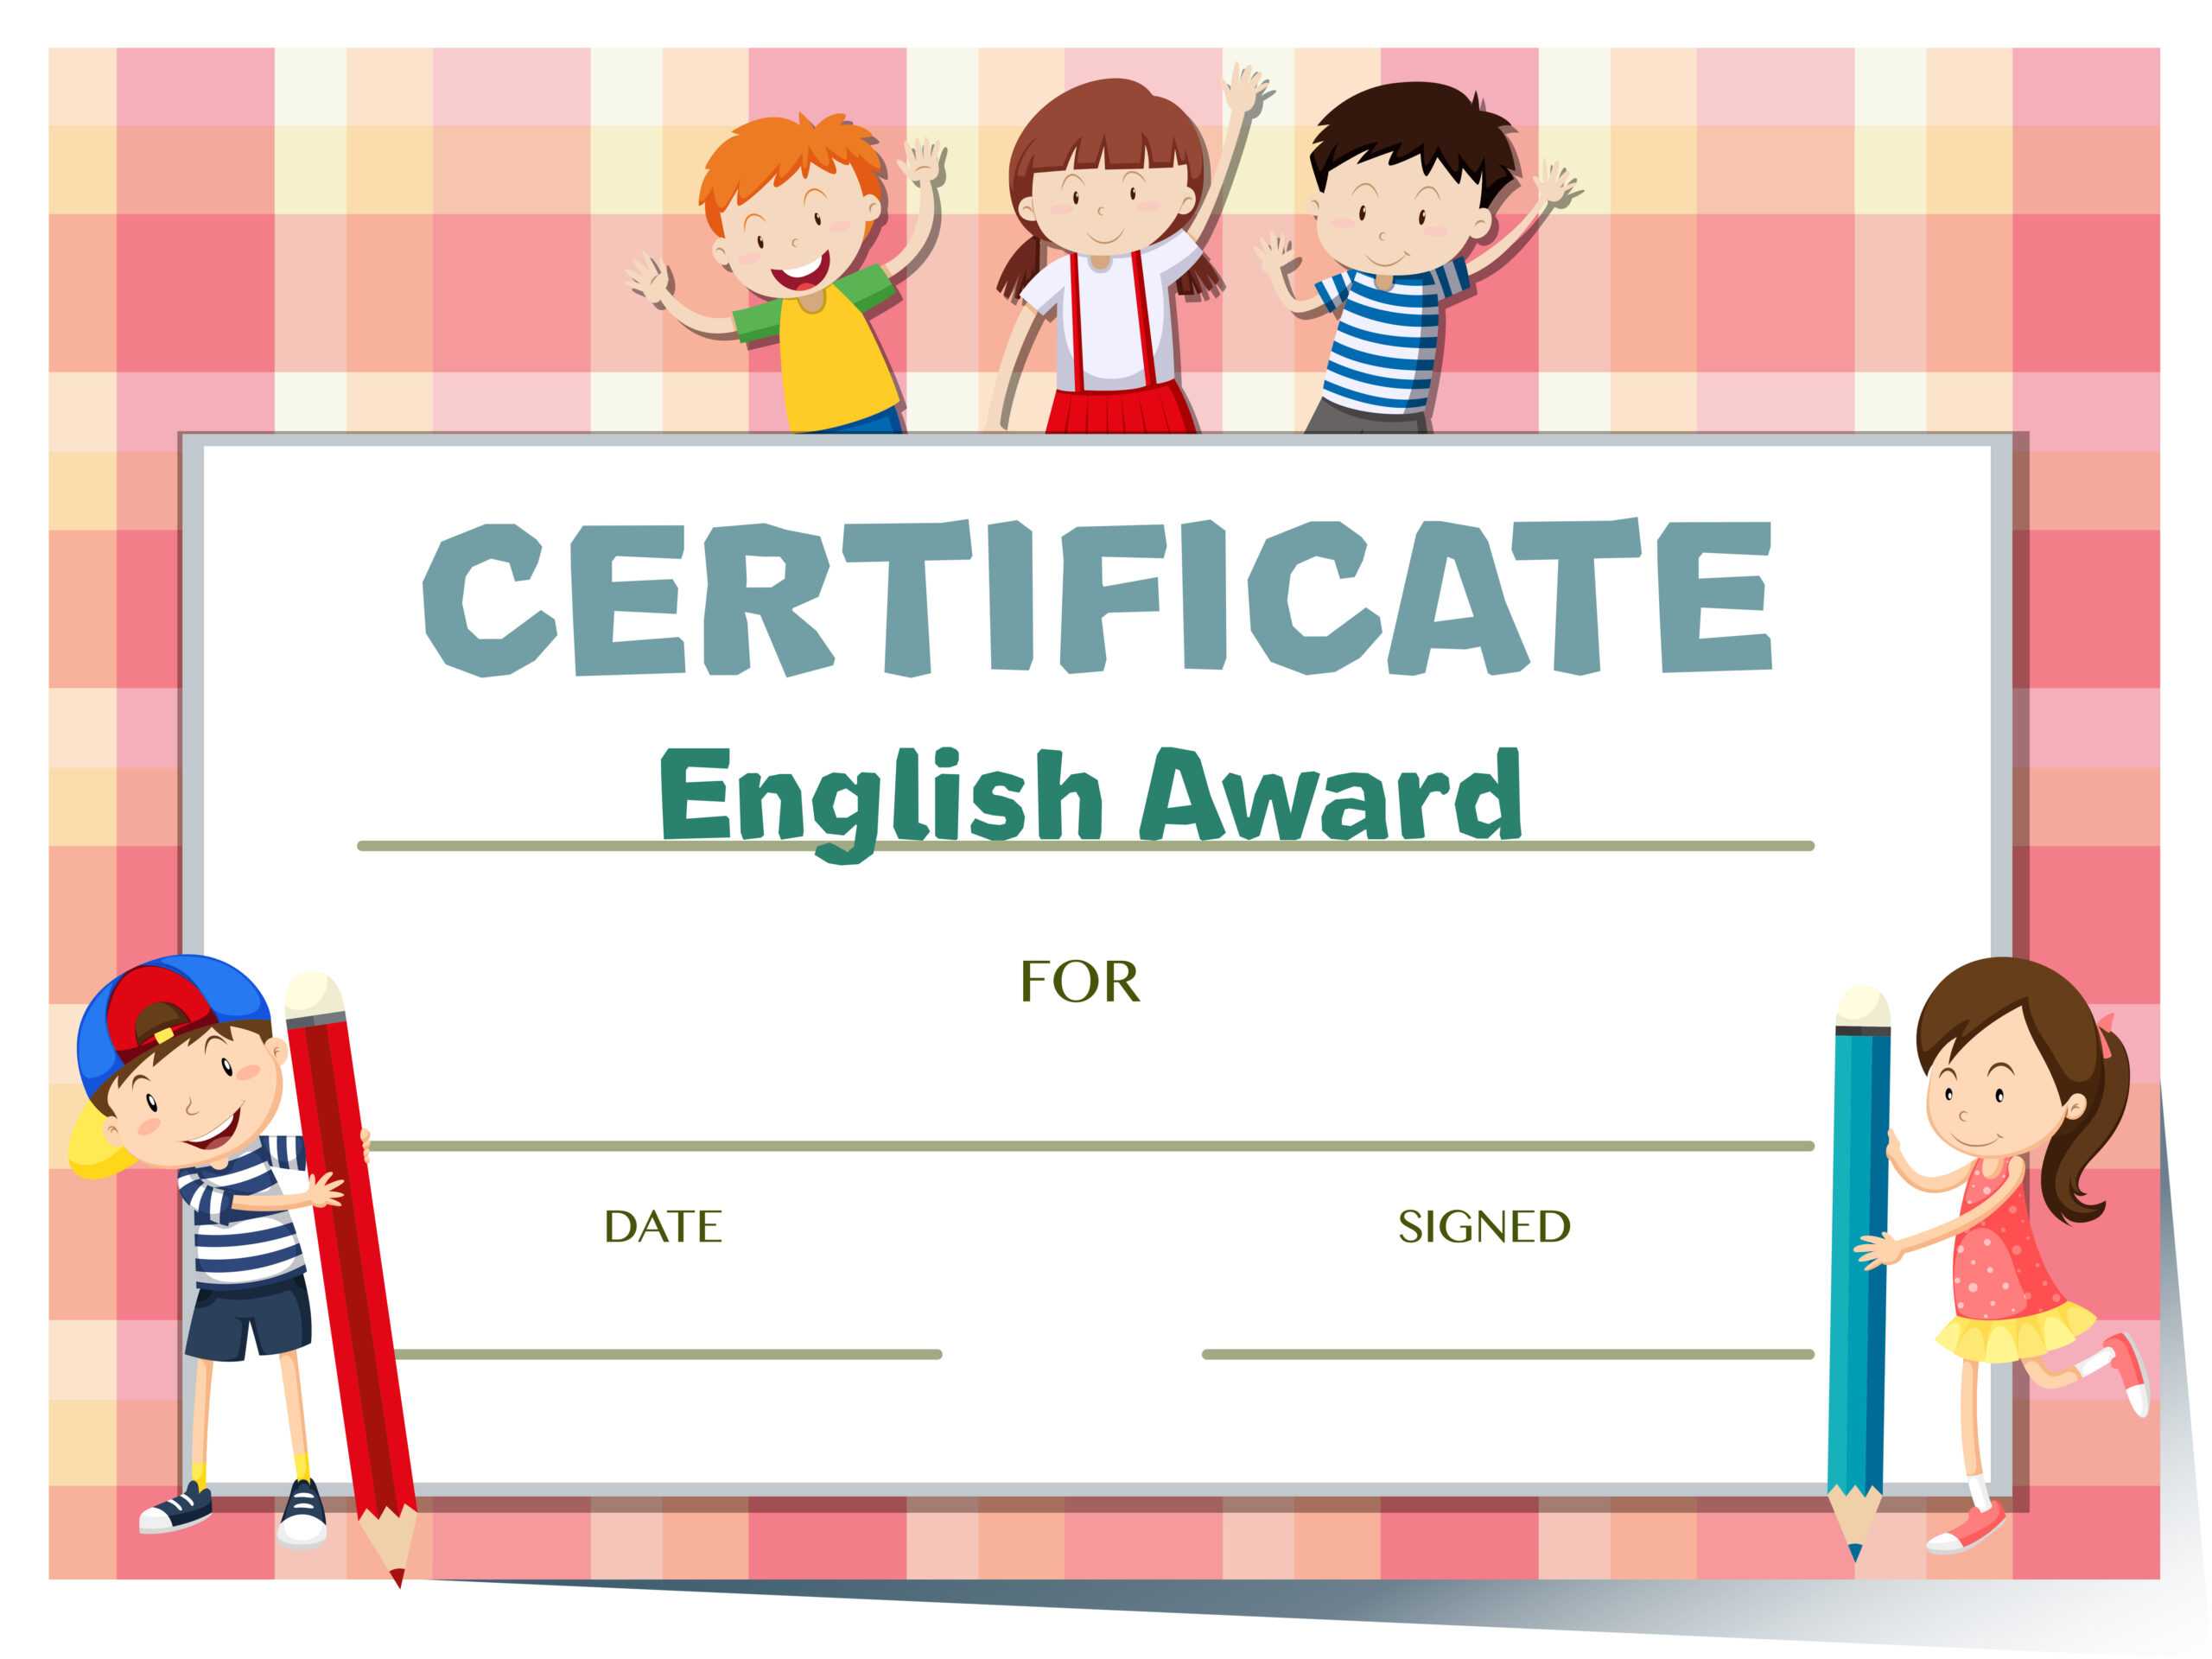 Certificate Template For English Award With Many Kids For Certificate Of Achievement Template For Kids